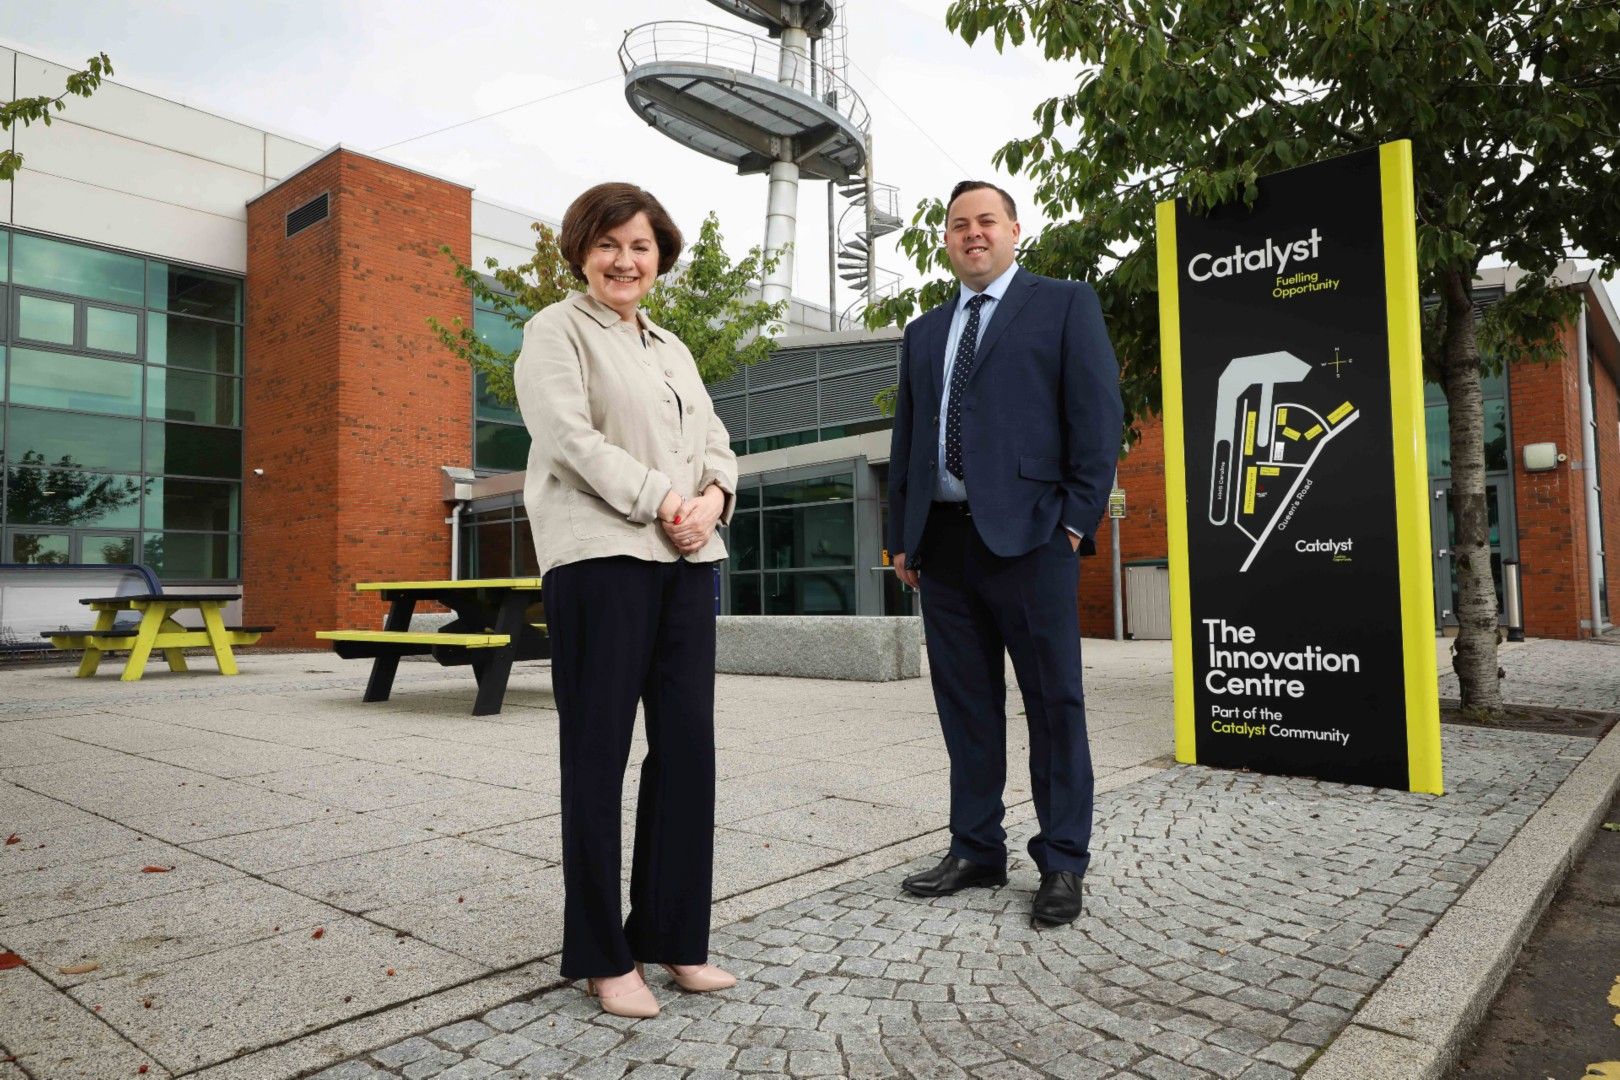 EY PARTNERS WITH CATALYST TO HELP DEVELOP NI’S INNOVATION ECOSYSTEM